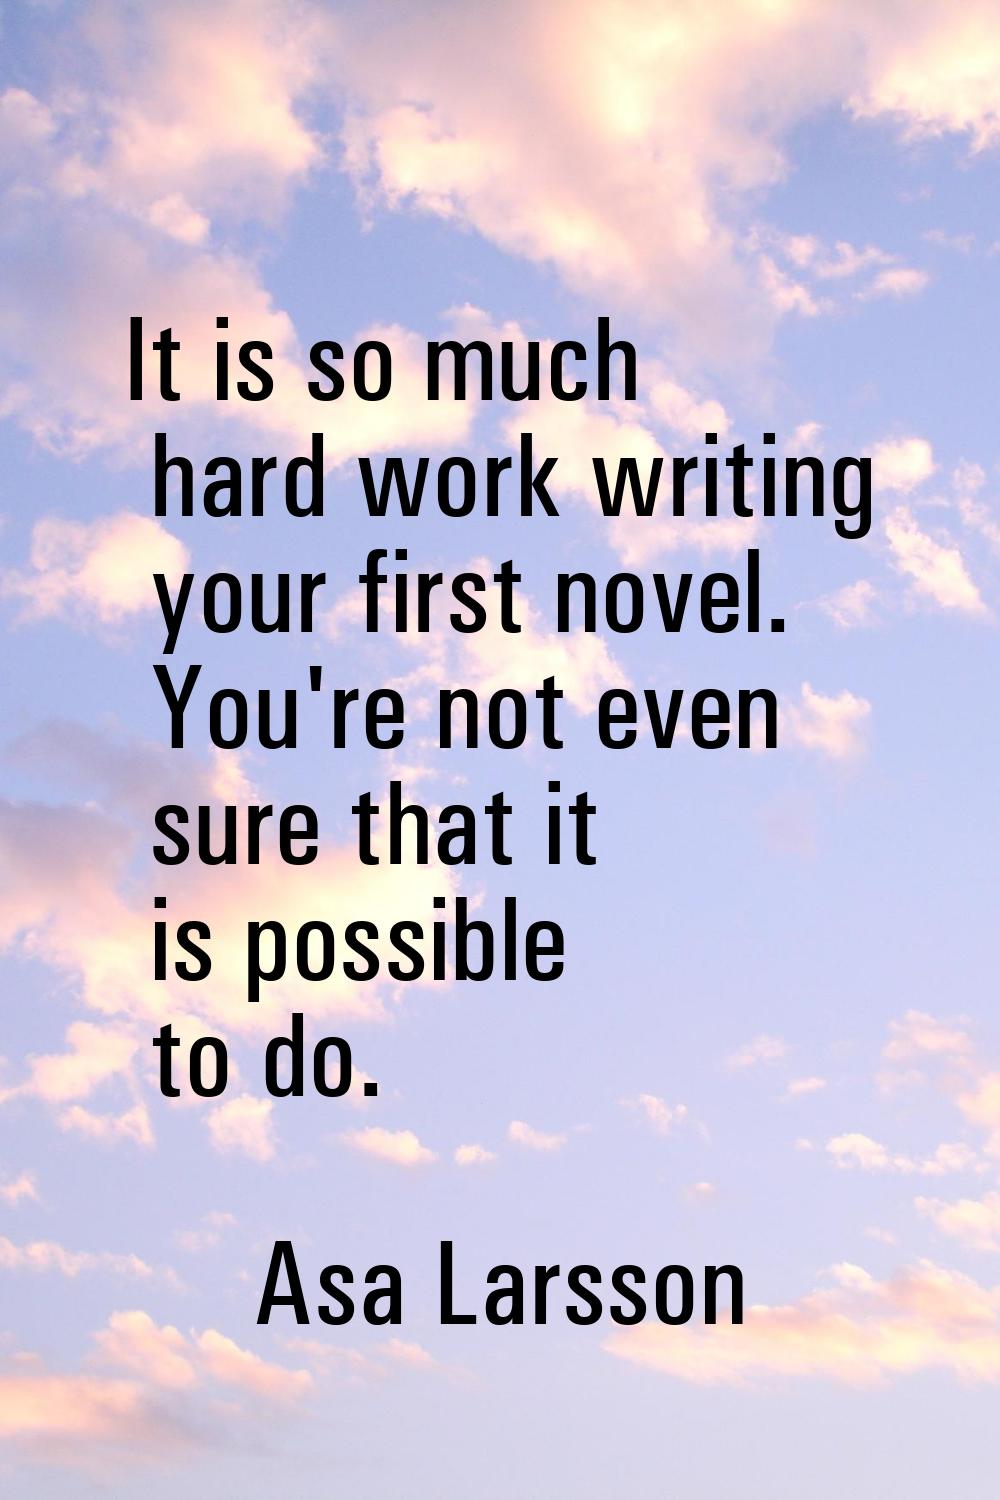 It is so much hard work writing your first novel. You're not even sure that it is possible to do.